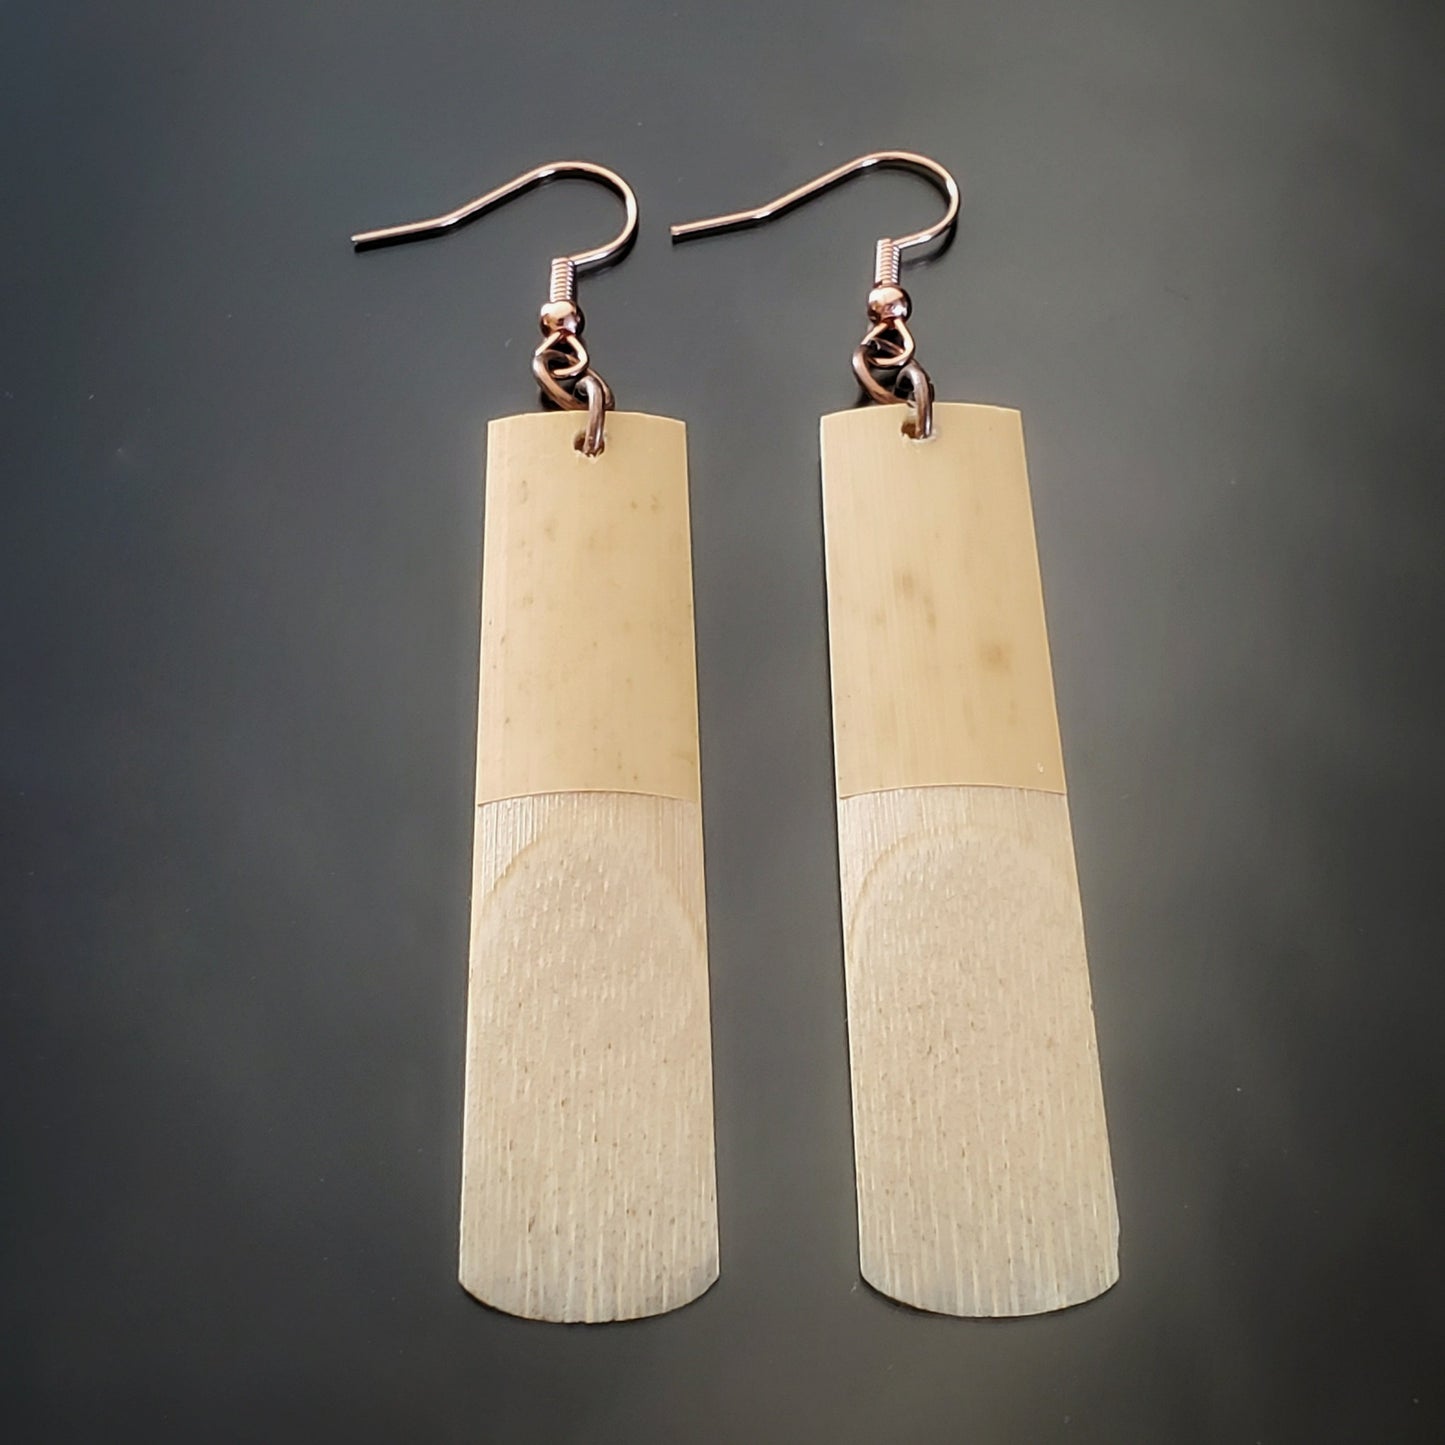 pair of earrings made from upcycled saxophone reeds